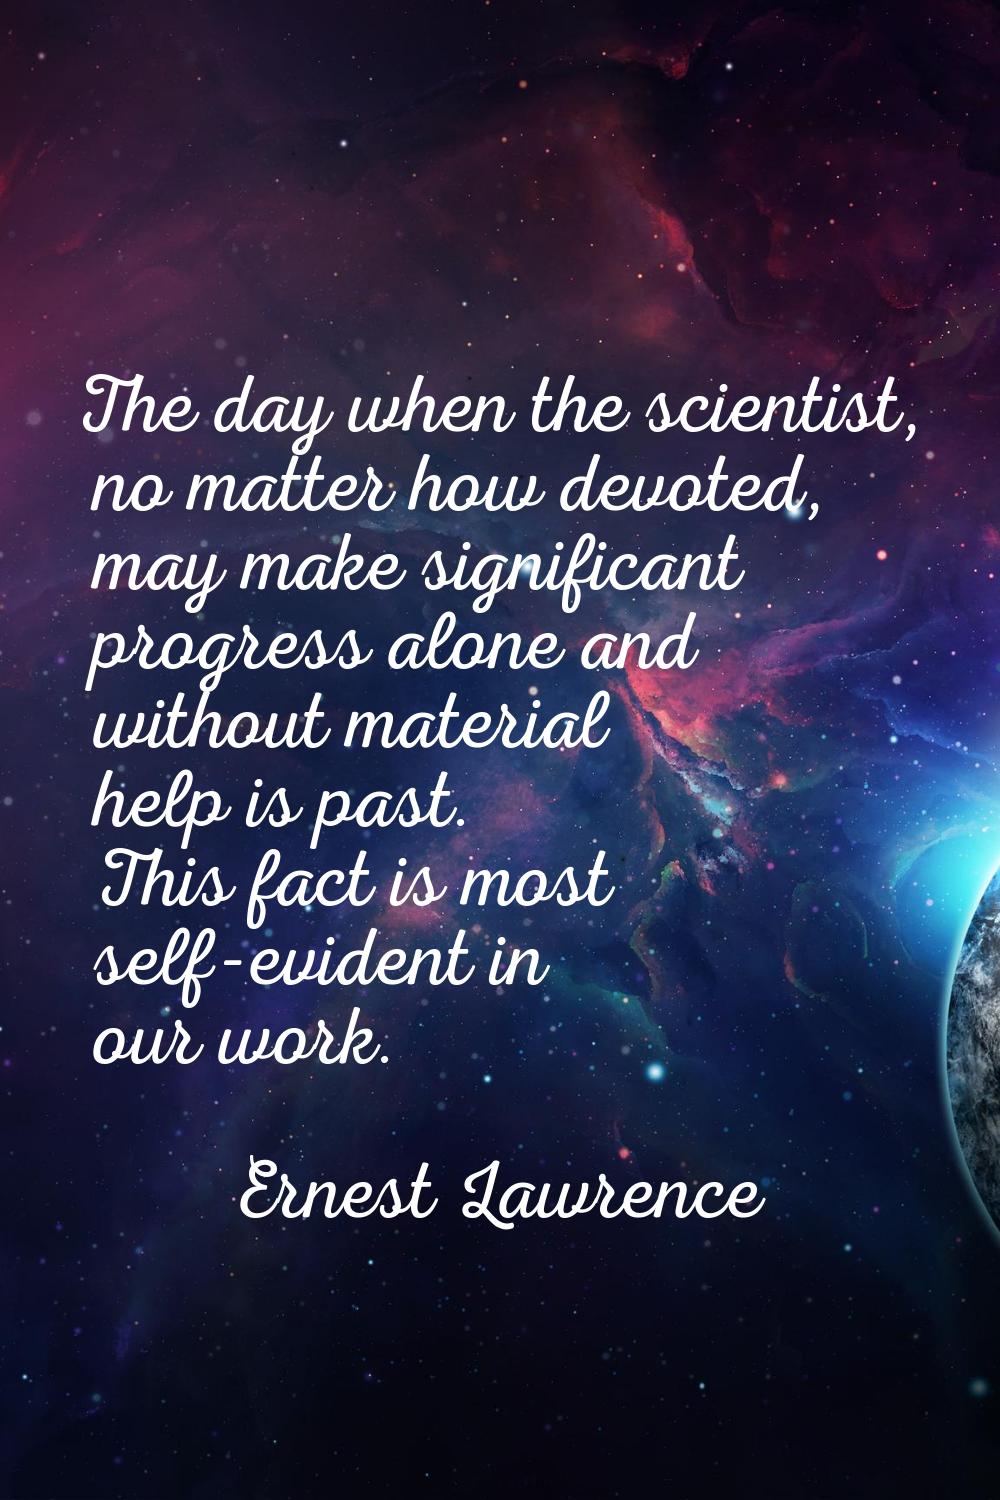 The day when the scientist, no matter how devoted, may make significant progress alone and without 